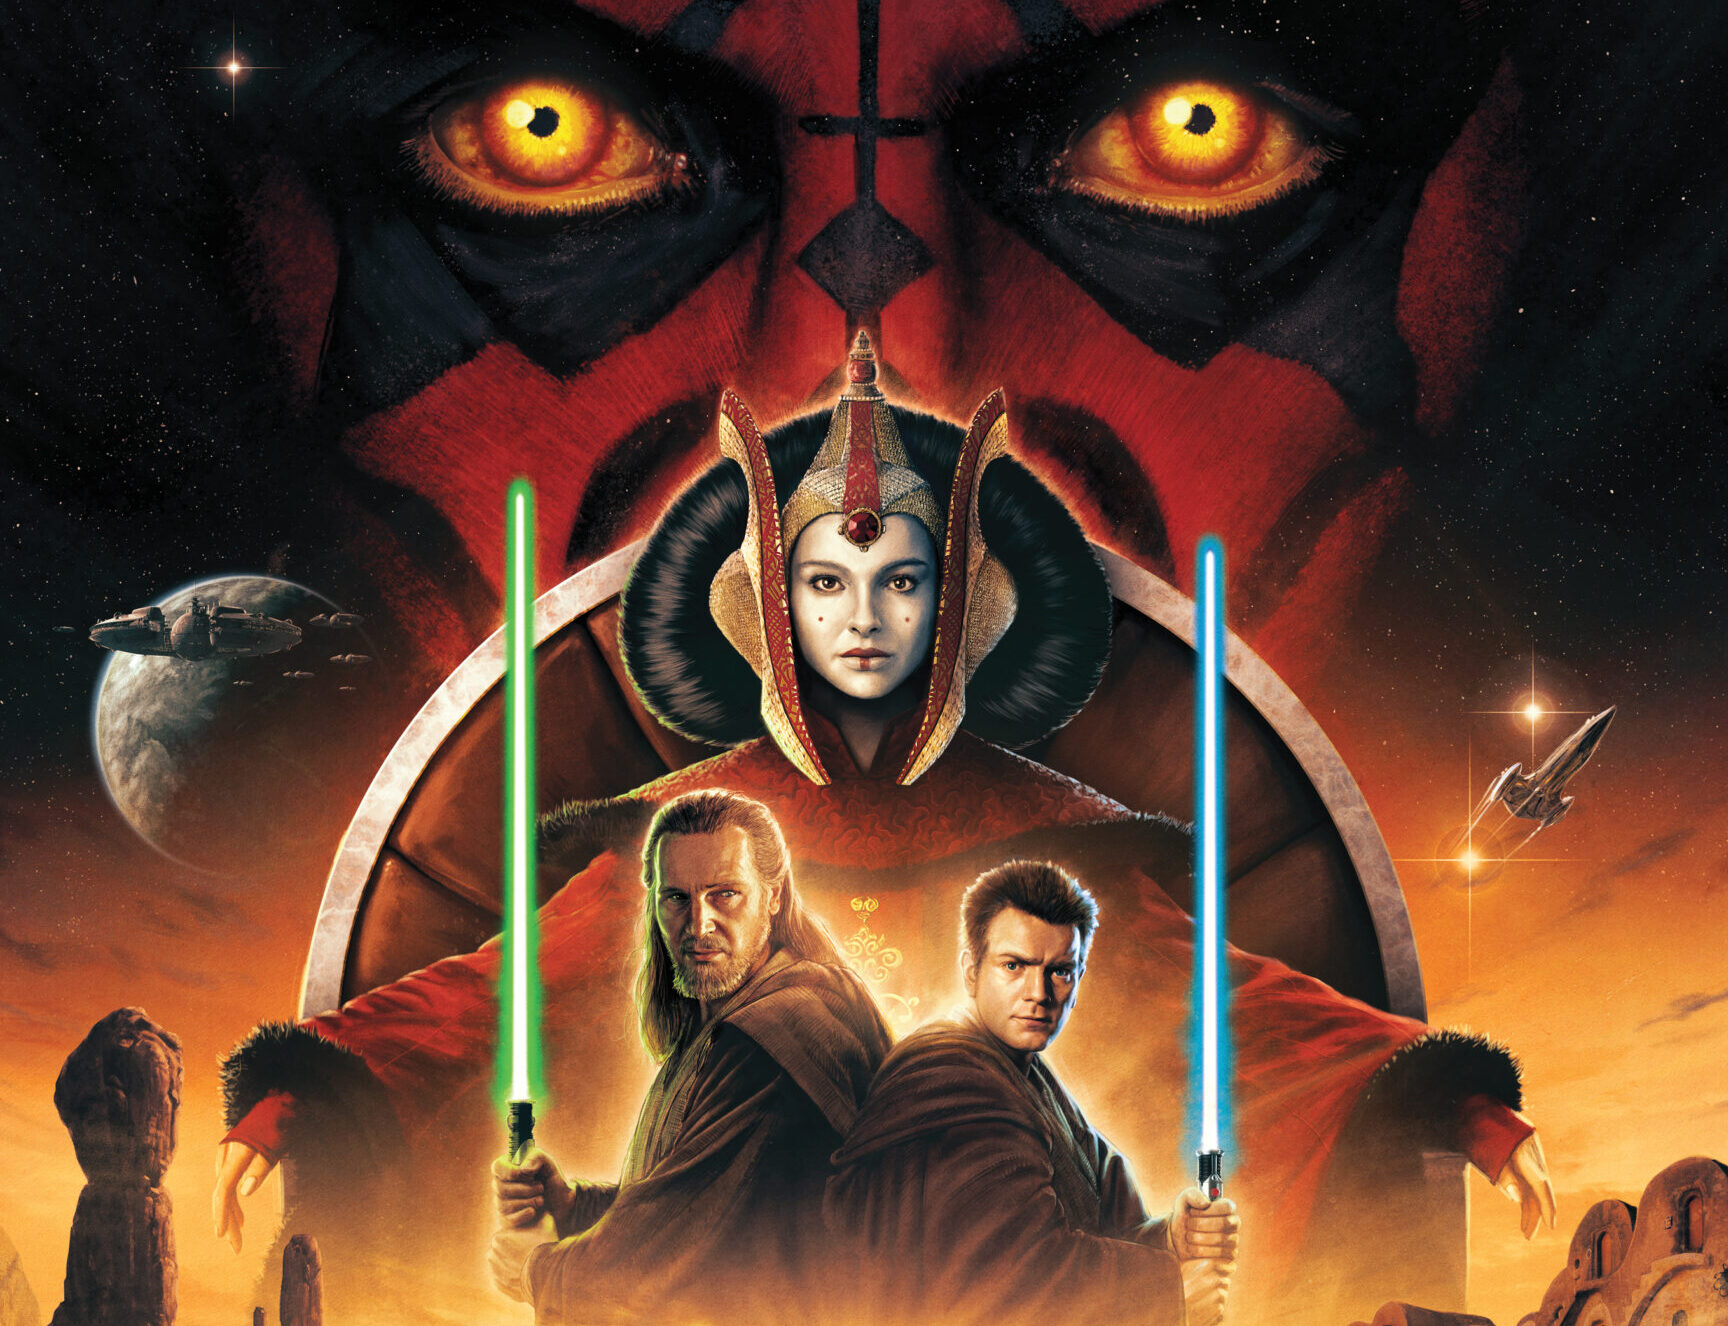 Lucasfilm Celebrates 25th Anniversary Of “The Phantom Menace” And Exciting Celebration News